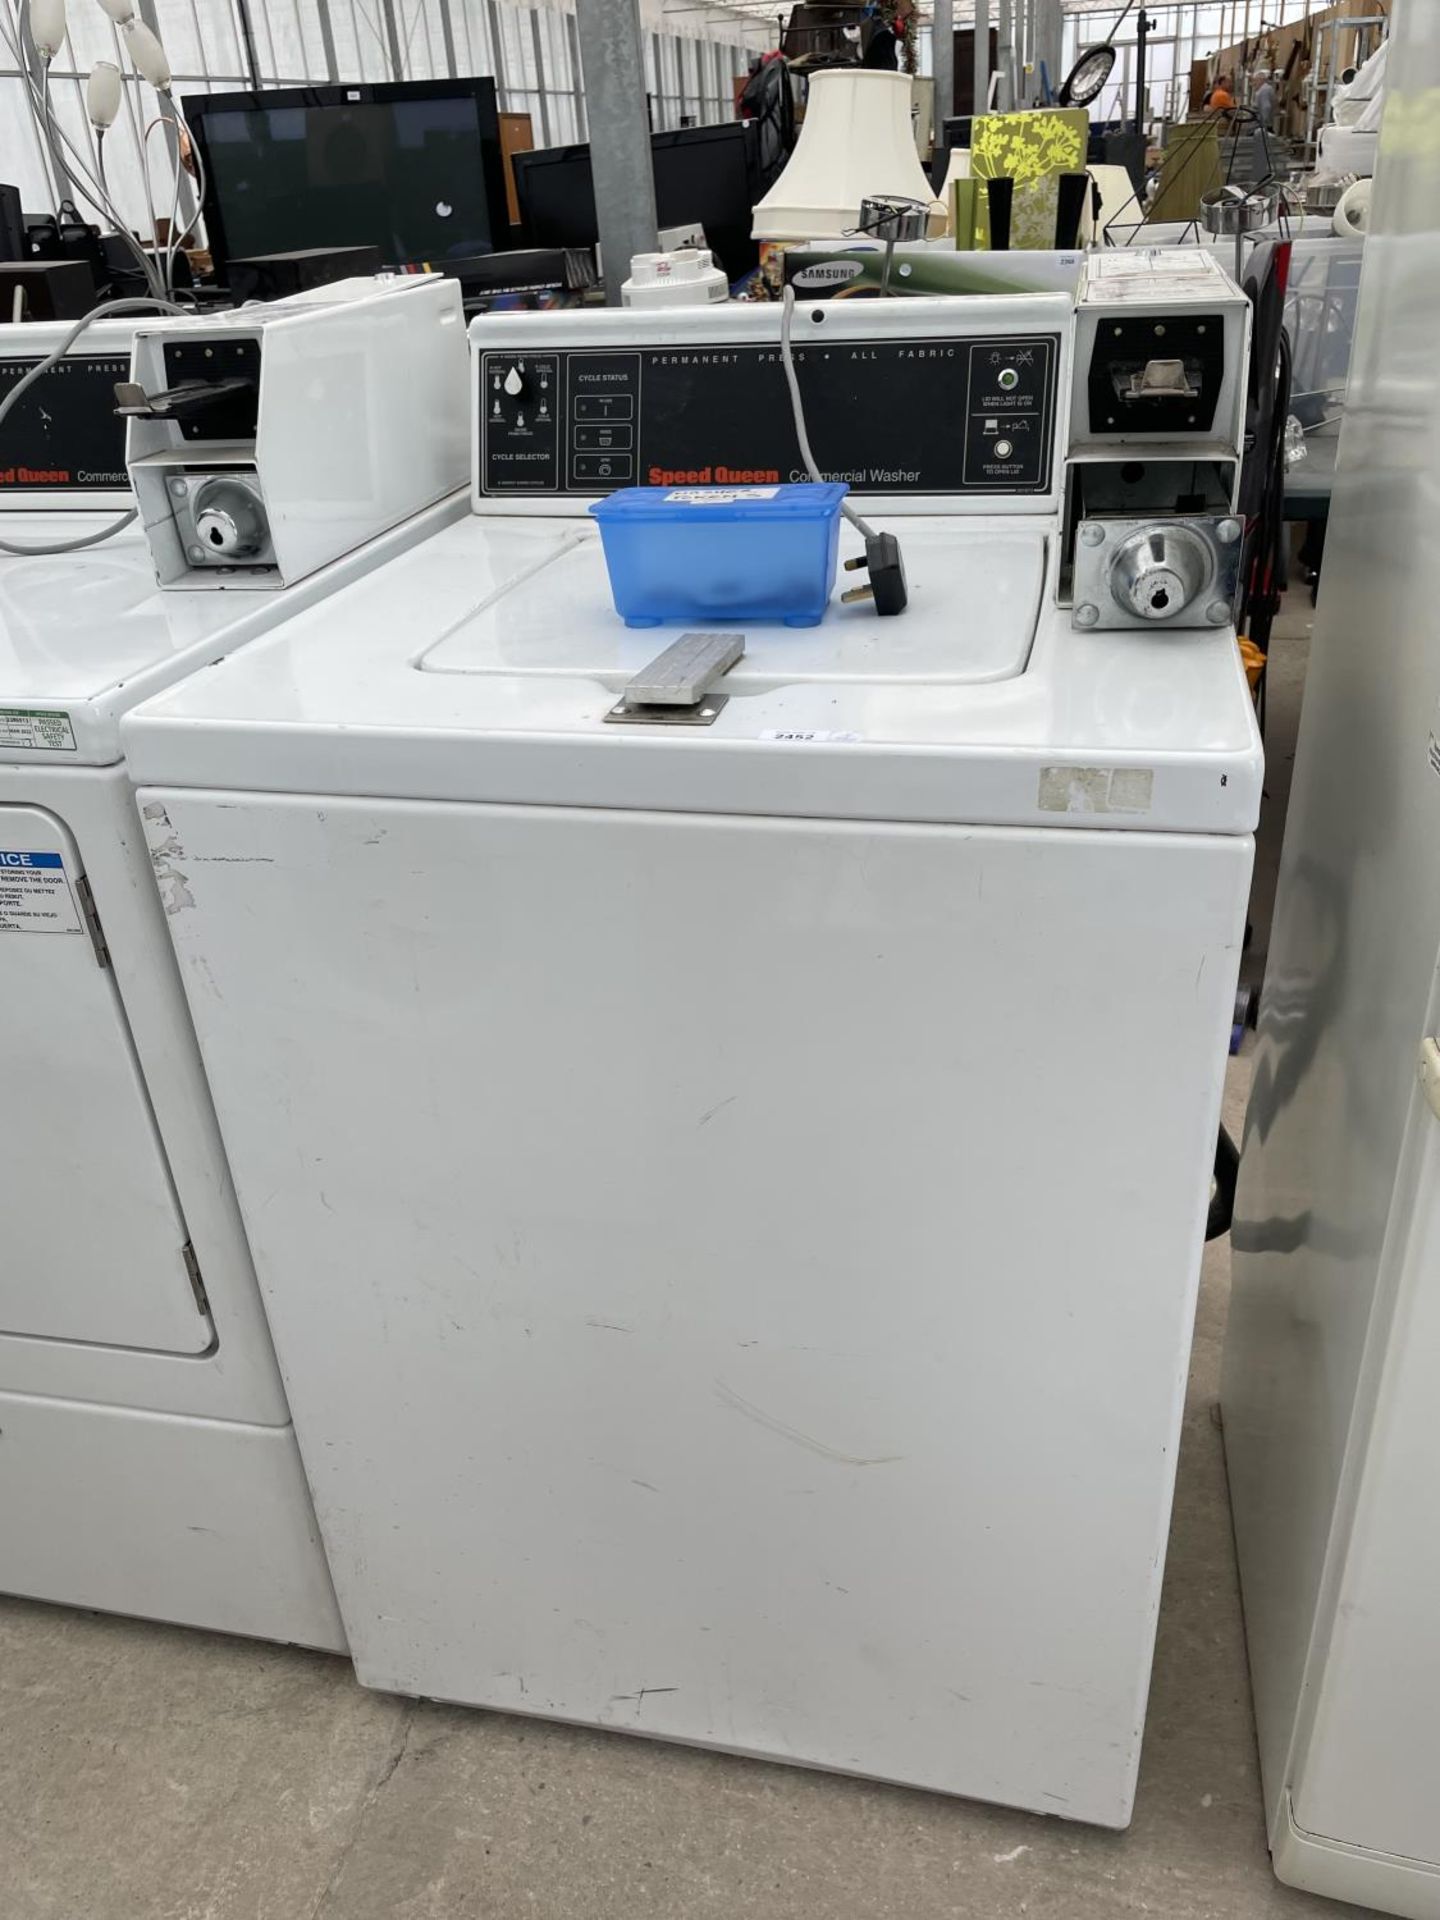 A SPEED QUEEN COMMERCIAL WASHER WITH TOKENS